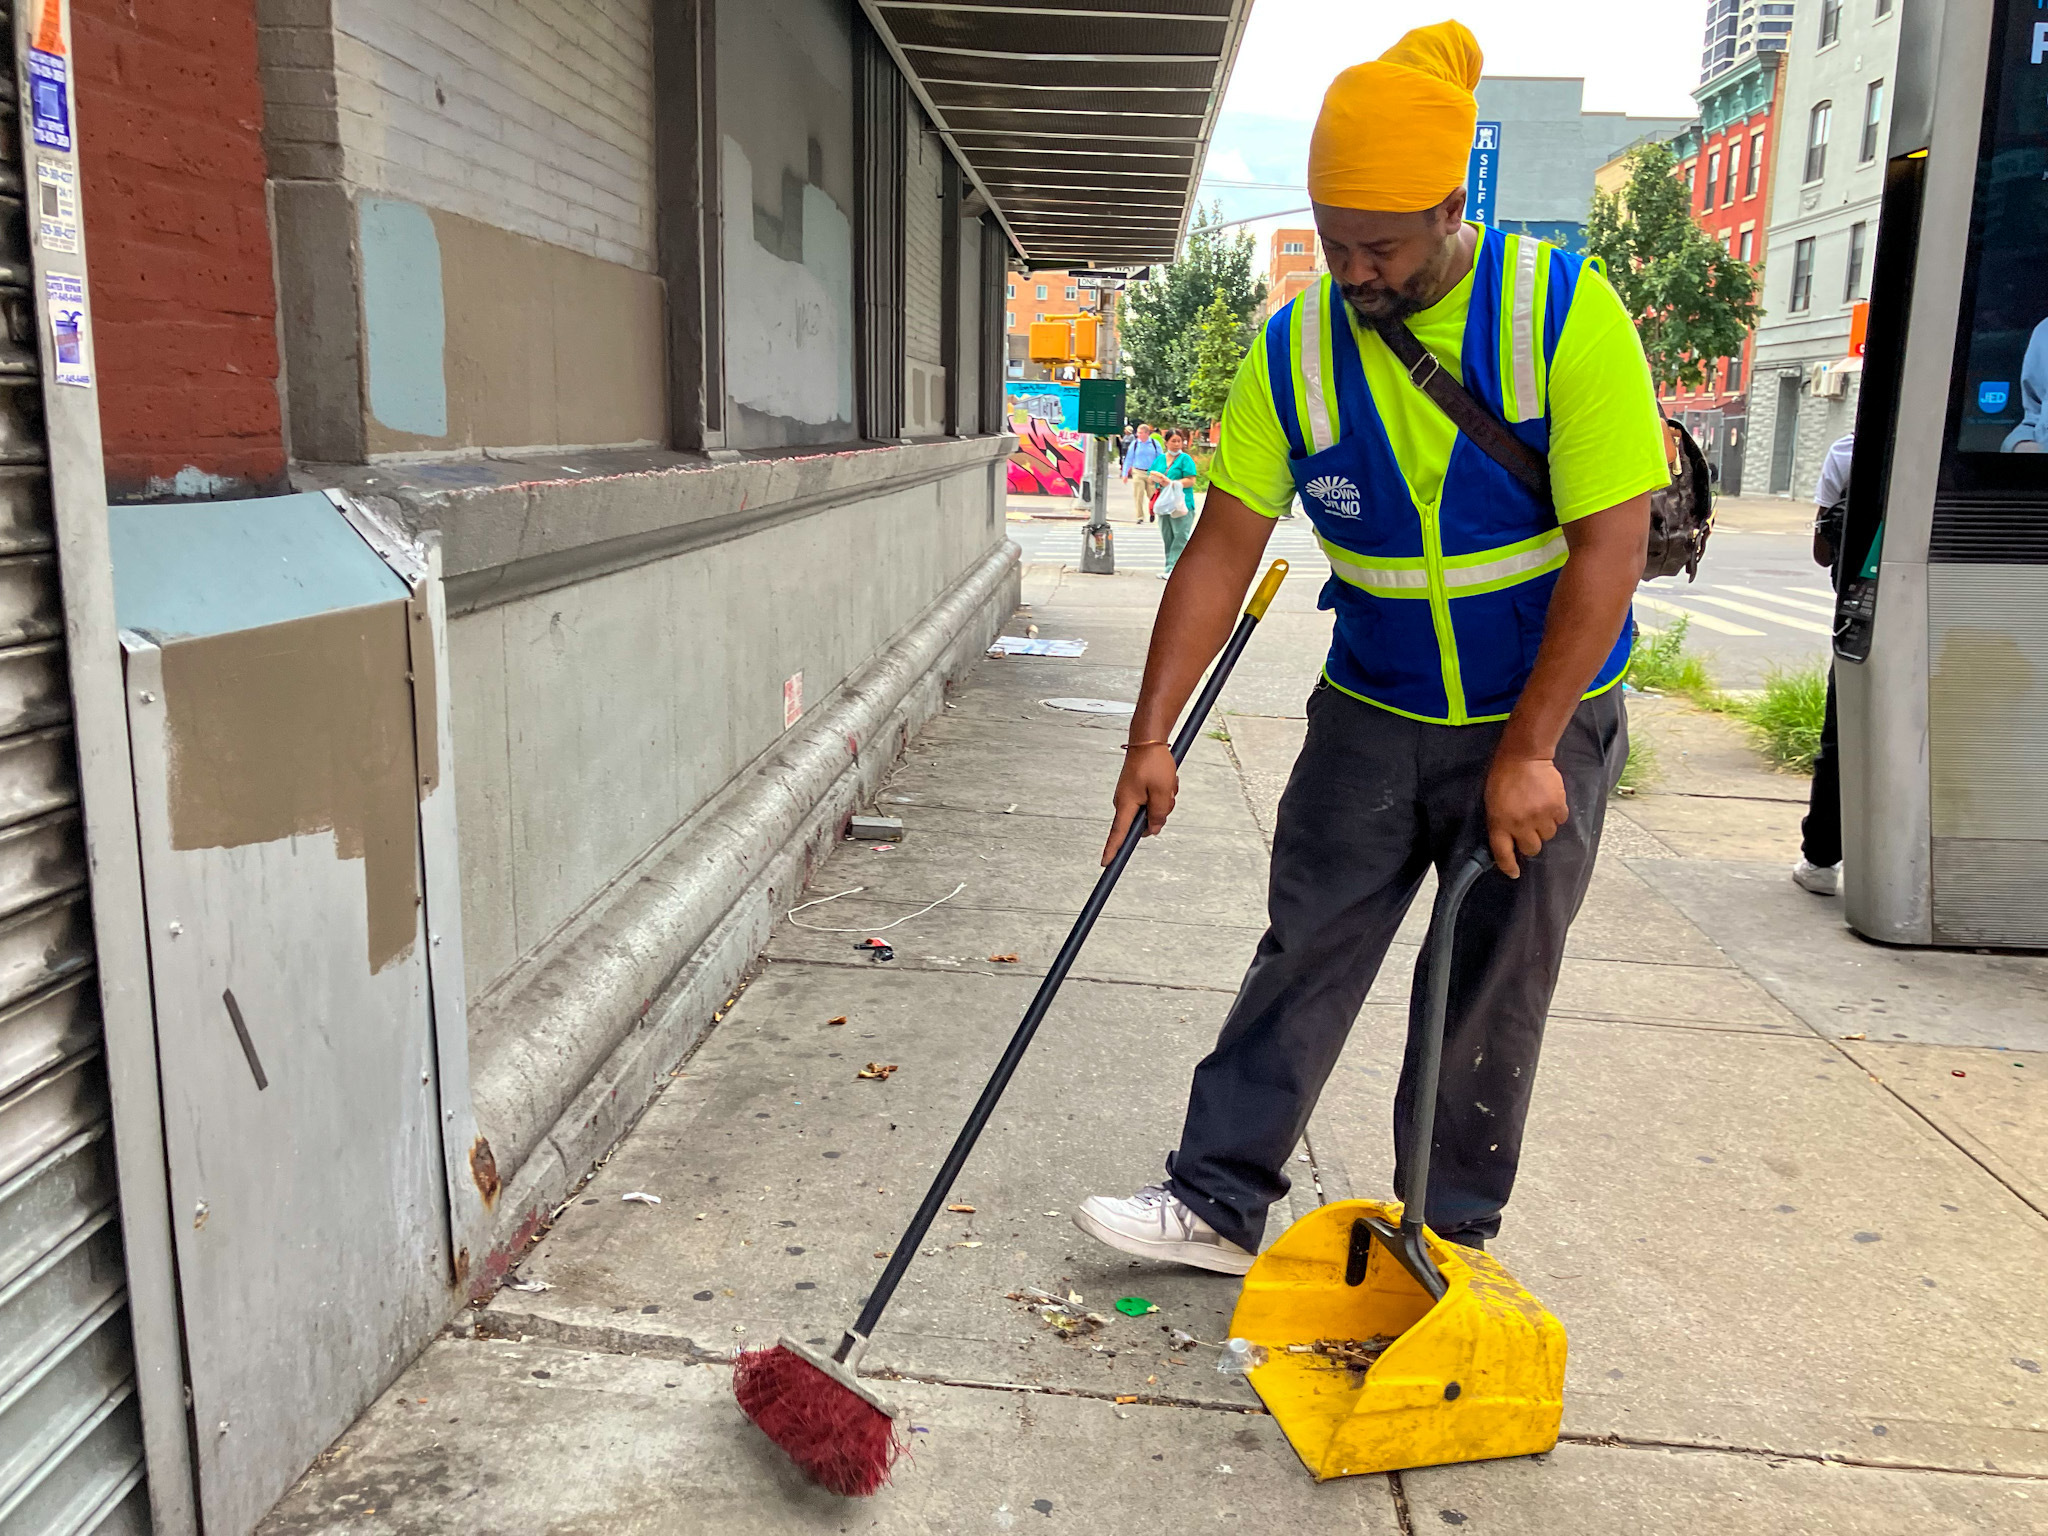 Jason McDavid cleans the city streets near the Metro North station on 125th Street in East Harlem.